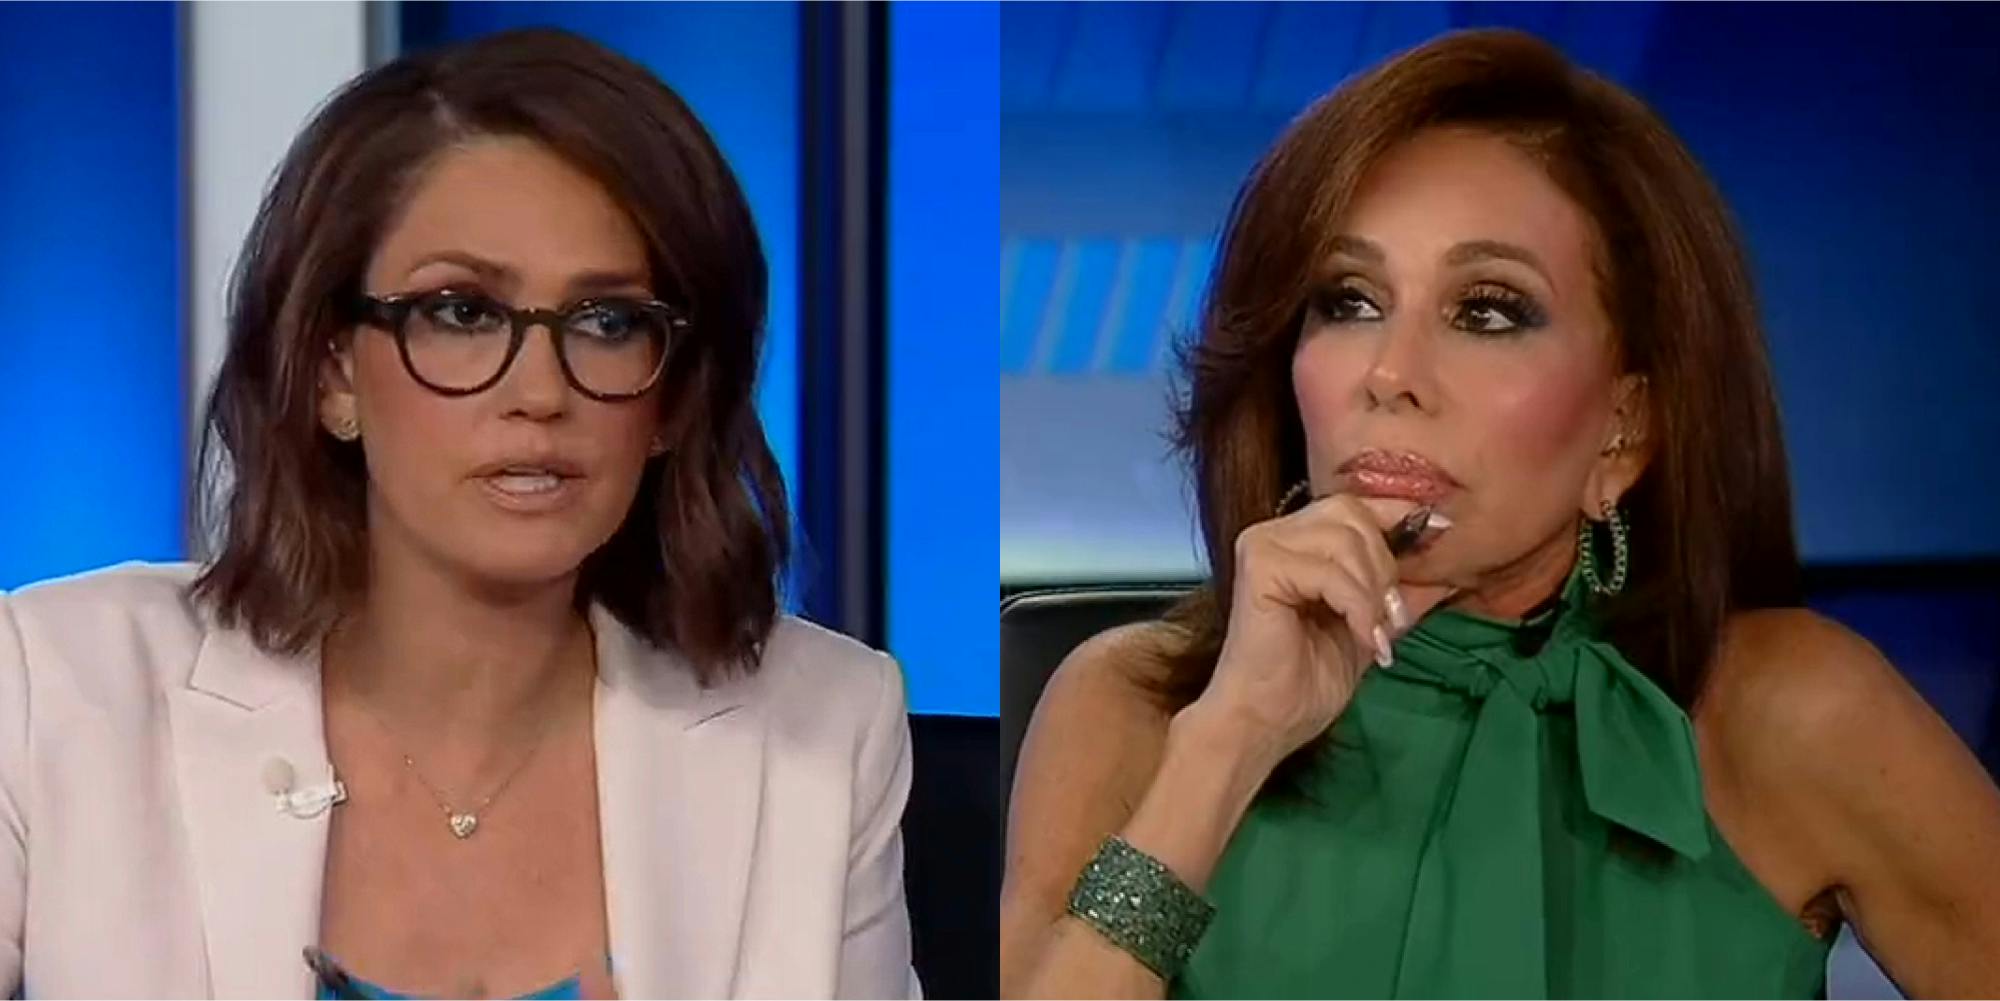 Fox's Jeanine Pirro named co-host of 'The Five